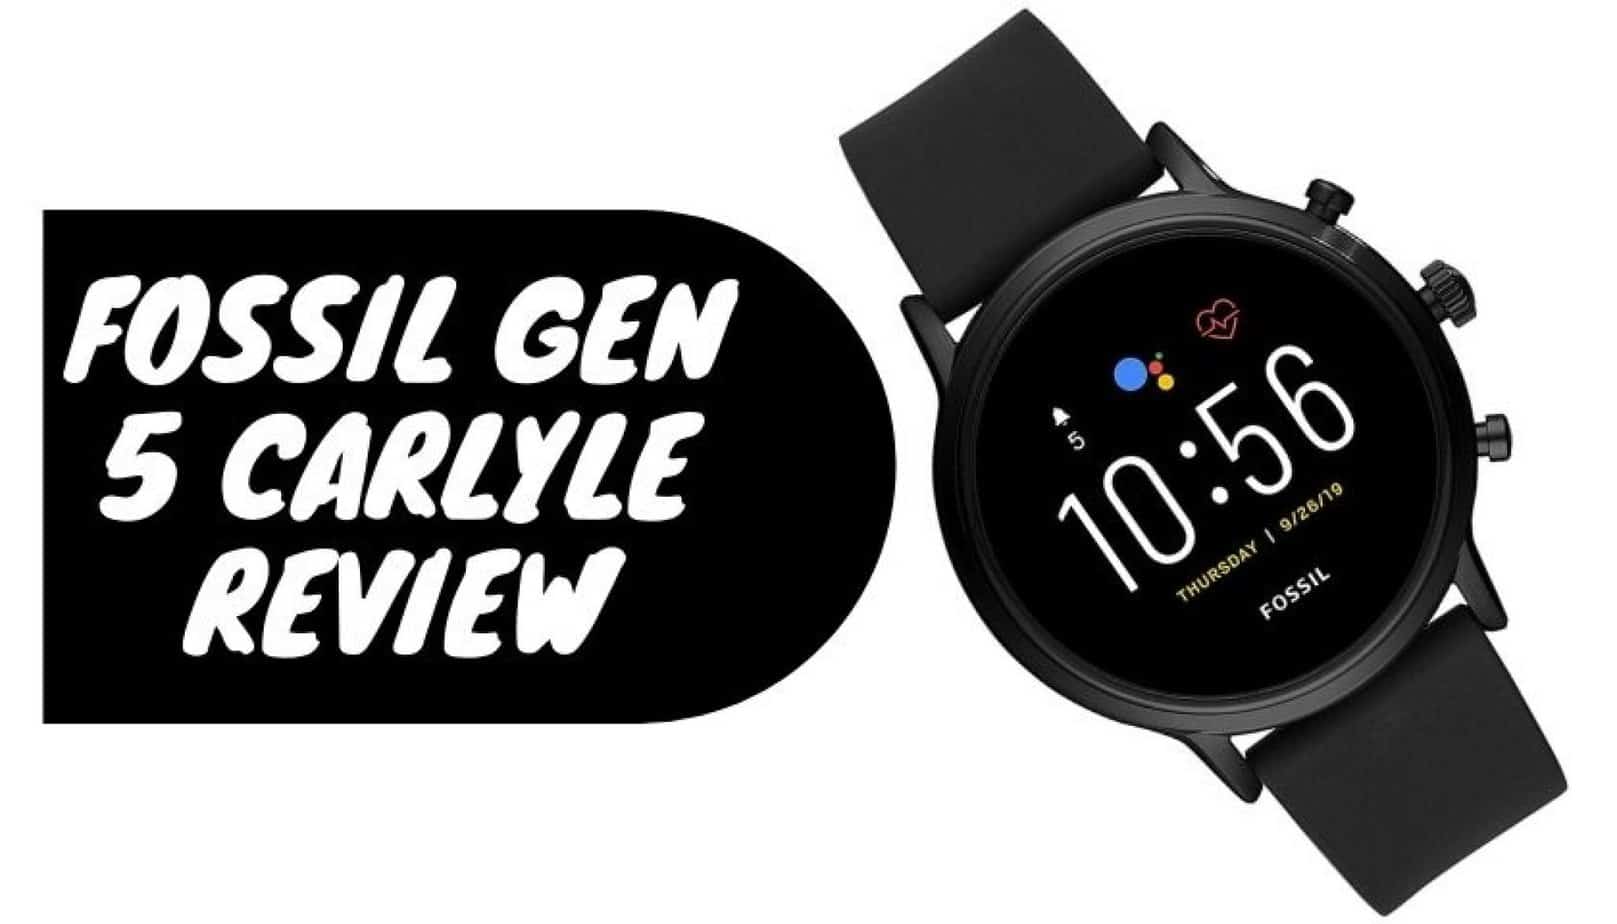 Fossil Gen 5 Carlyle Review | Picked Watch